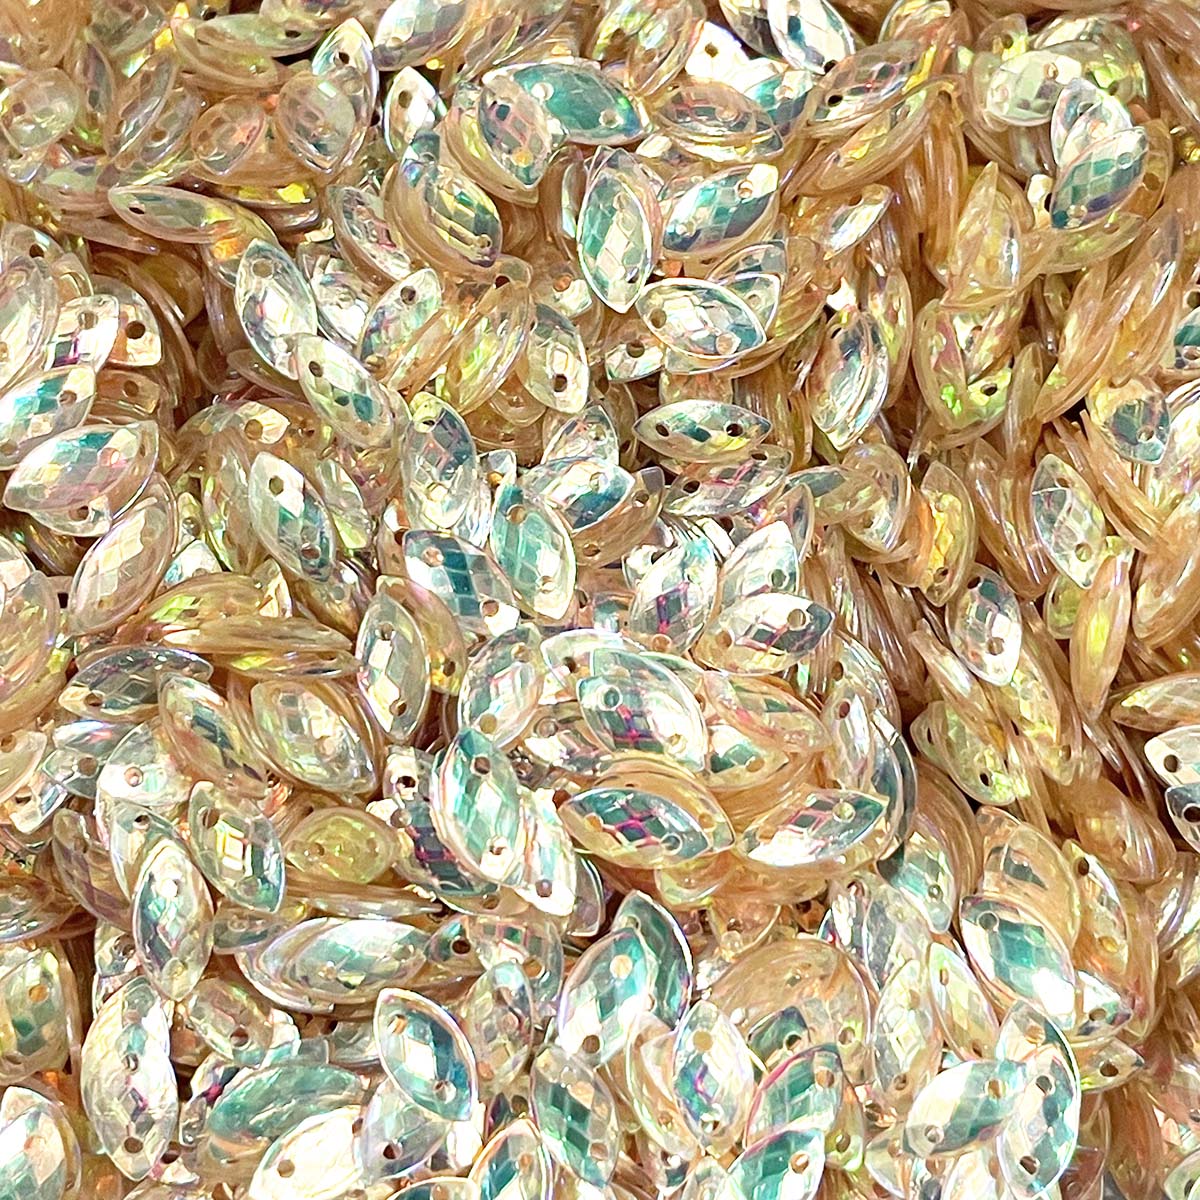 www.colourstreams.com.au Colour Streams Sequins Embellishments Costumes Mardi Gras Dancing Ballet Theatre Shows Drag Queen Bling Australia Canada NZ USA Paillettes Millinary Couture Leaf Transparent Reflective Shiny Lights Sequin 10mm x 5mm Gold Blue Green Lights S191